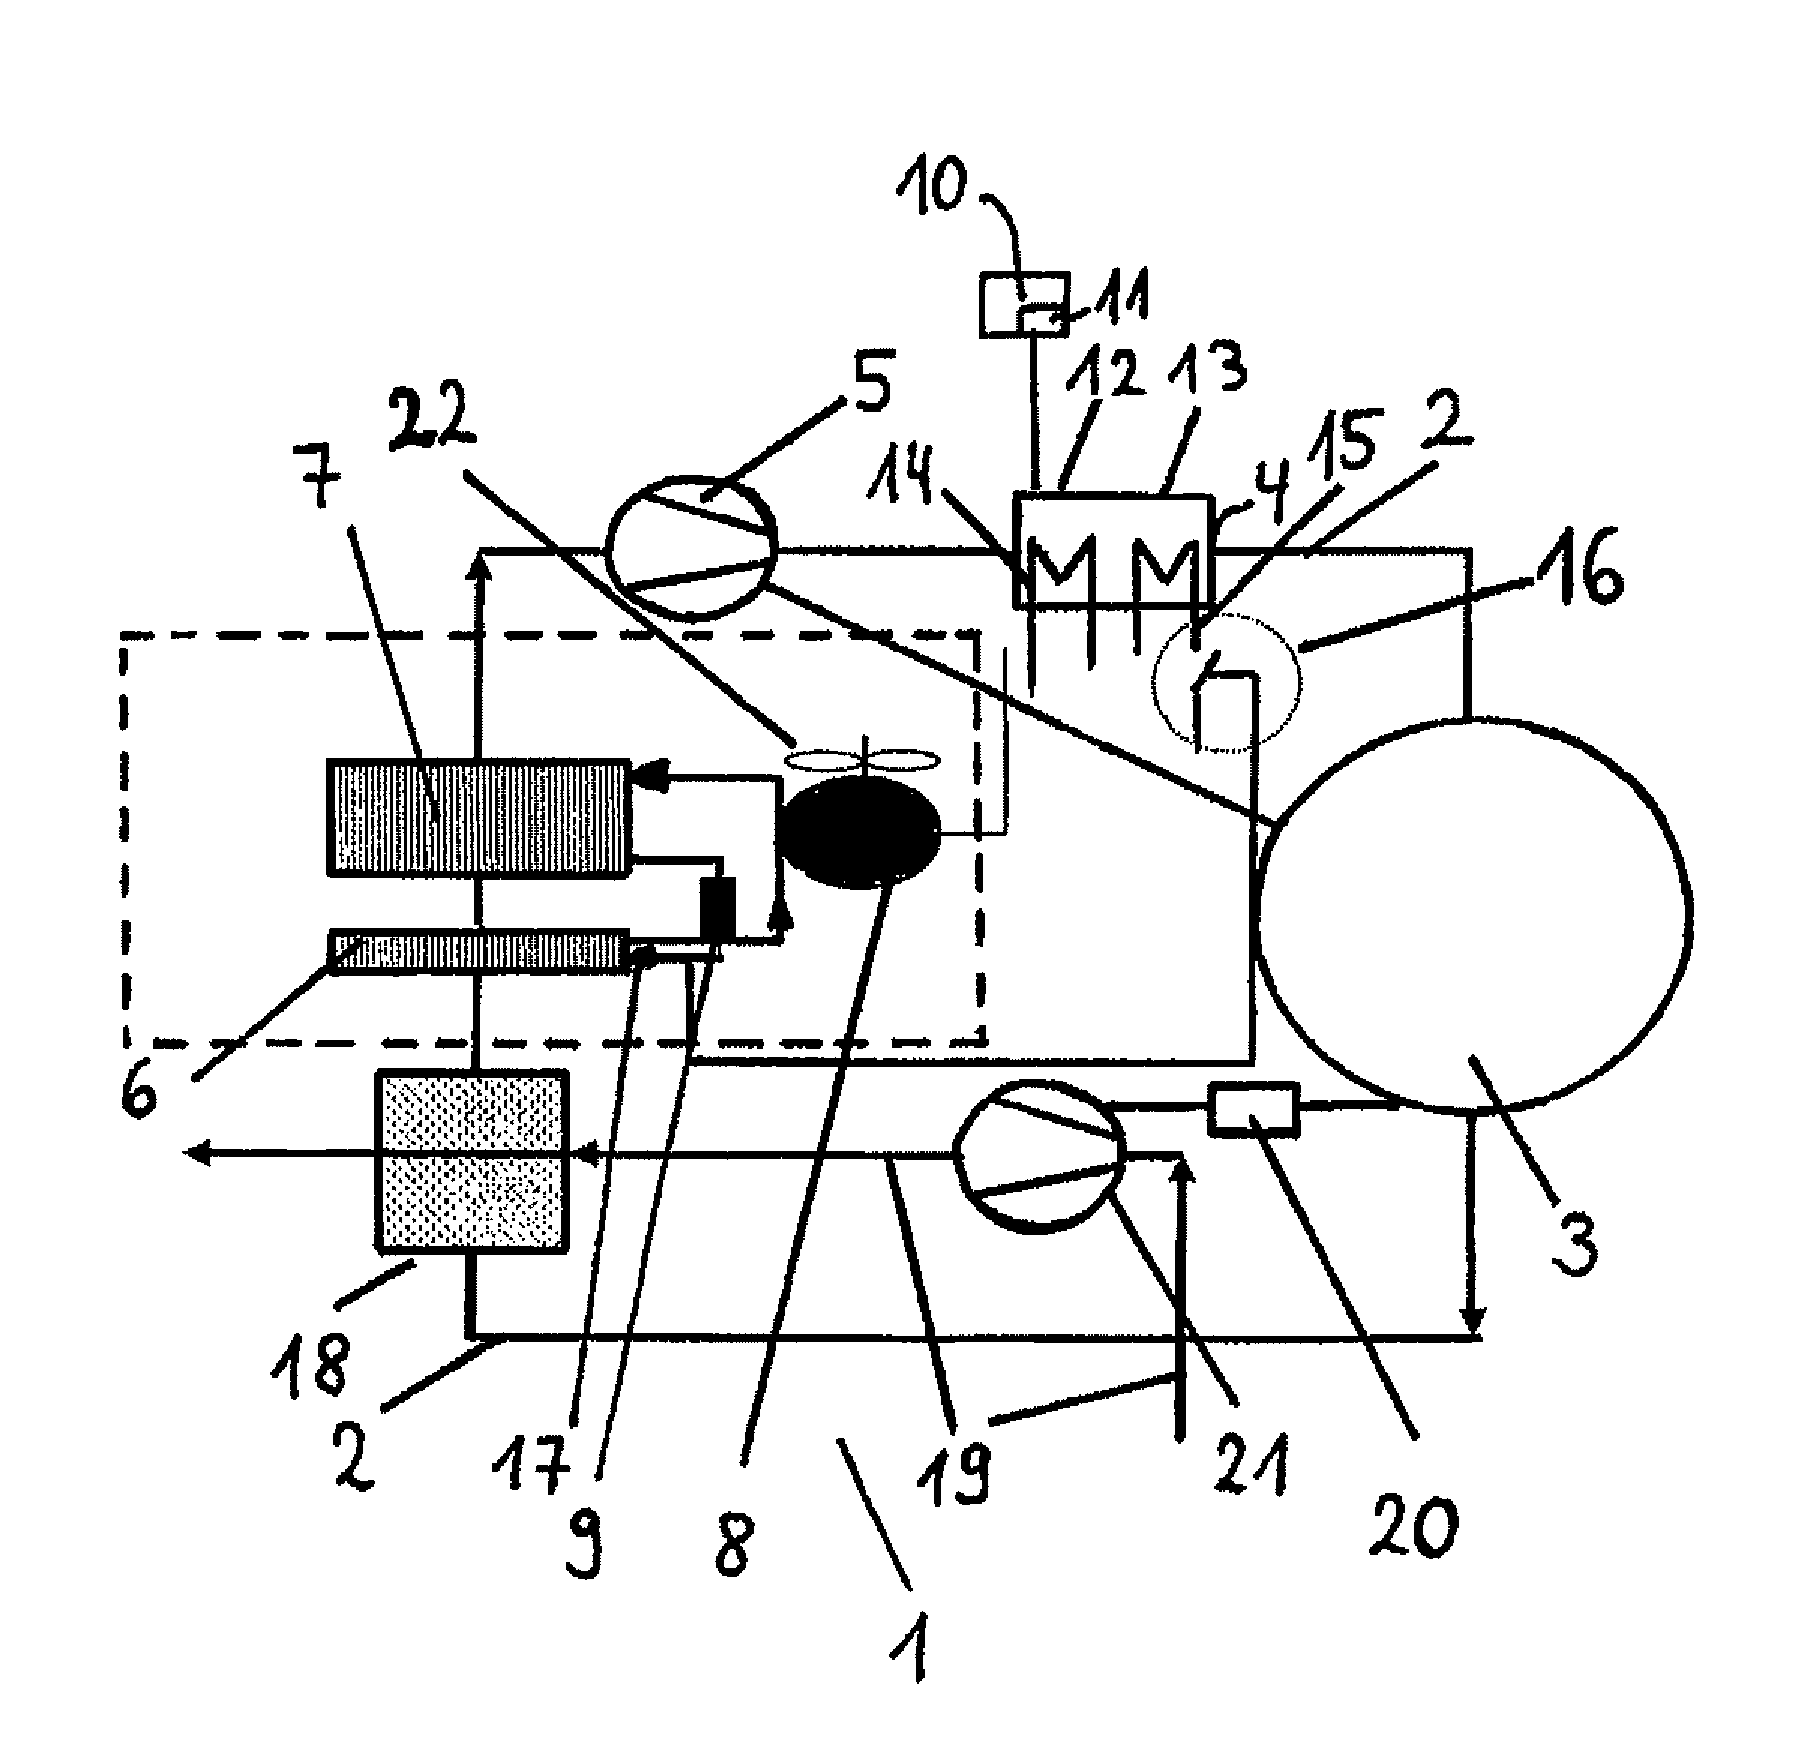 Tumble dryer comprising a heat pump and heating system and method for operating the same